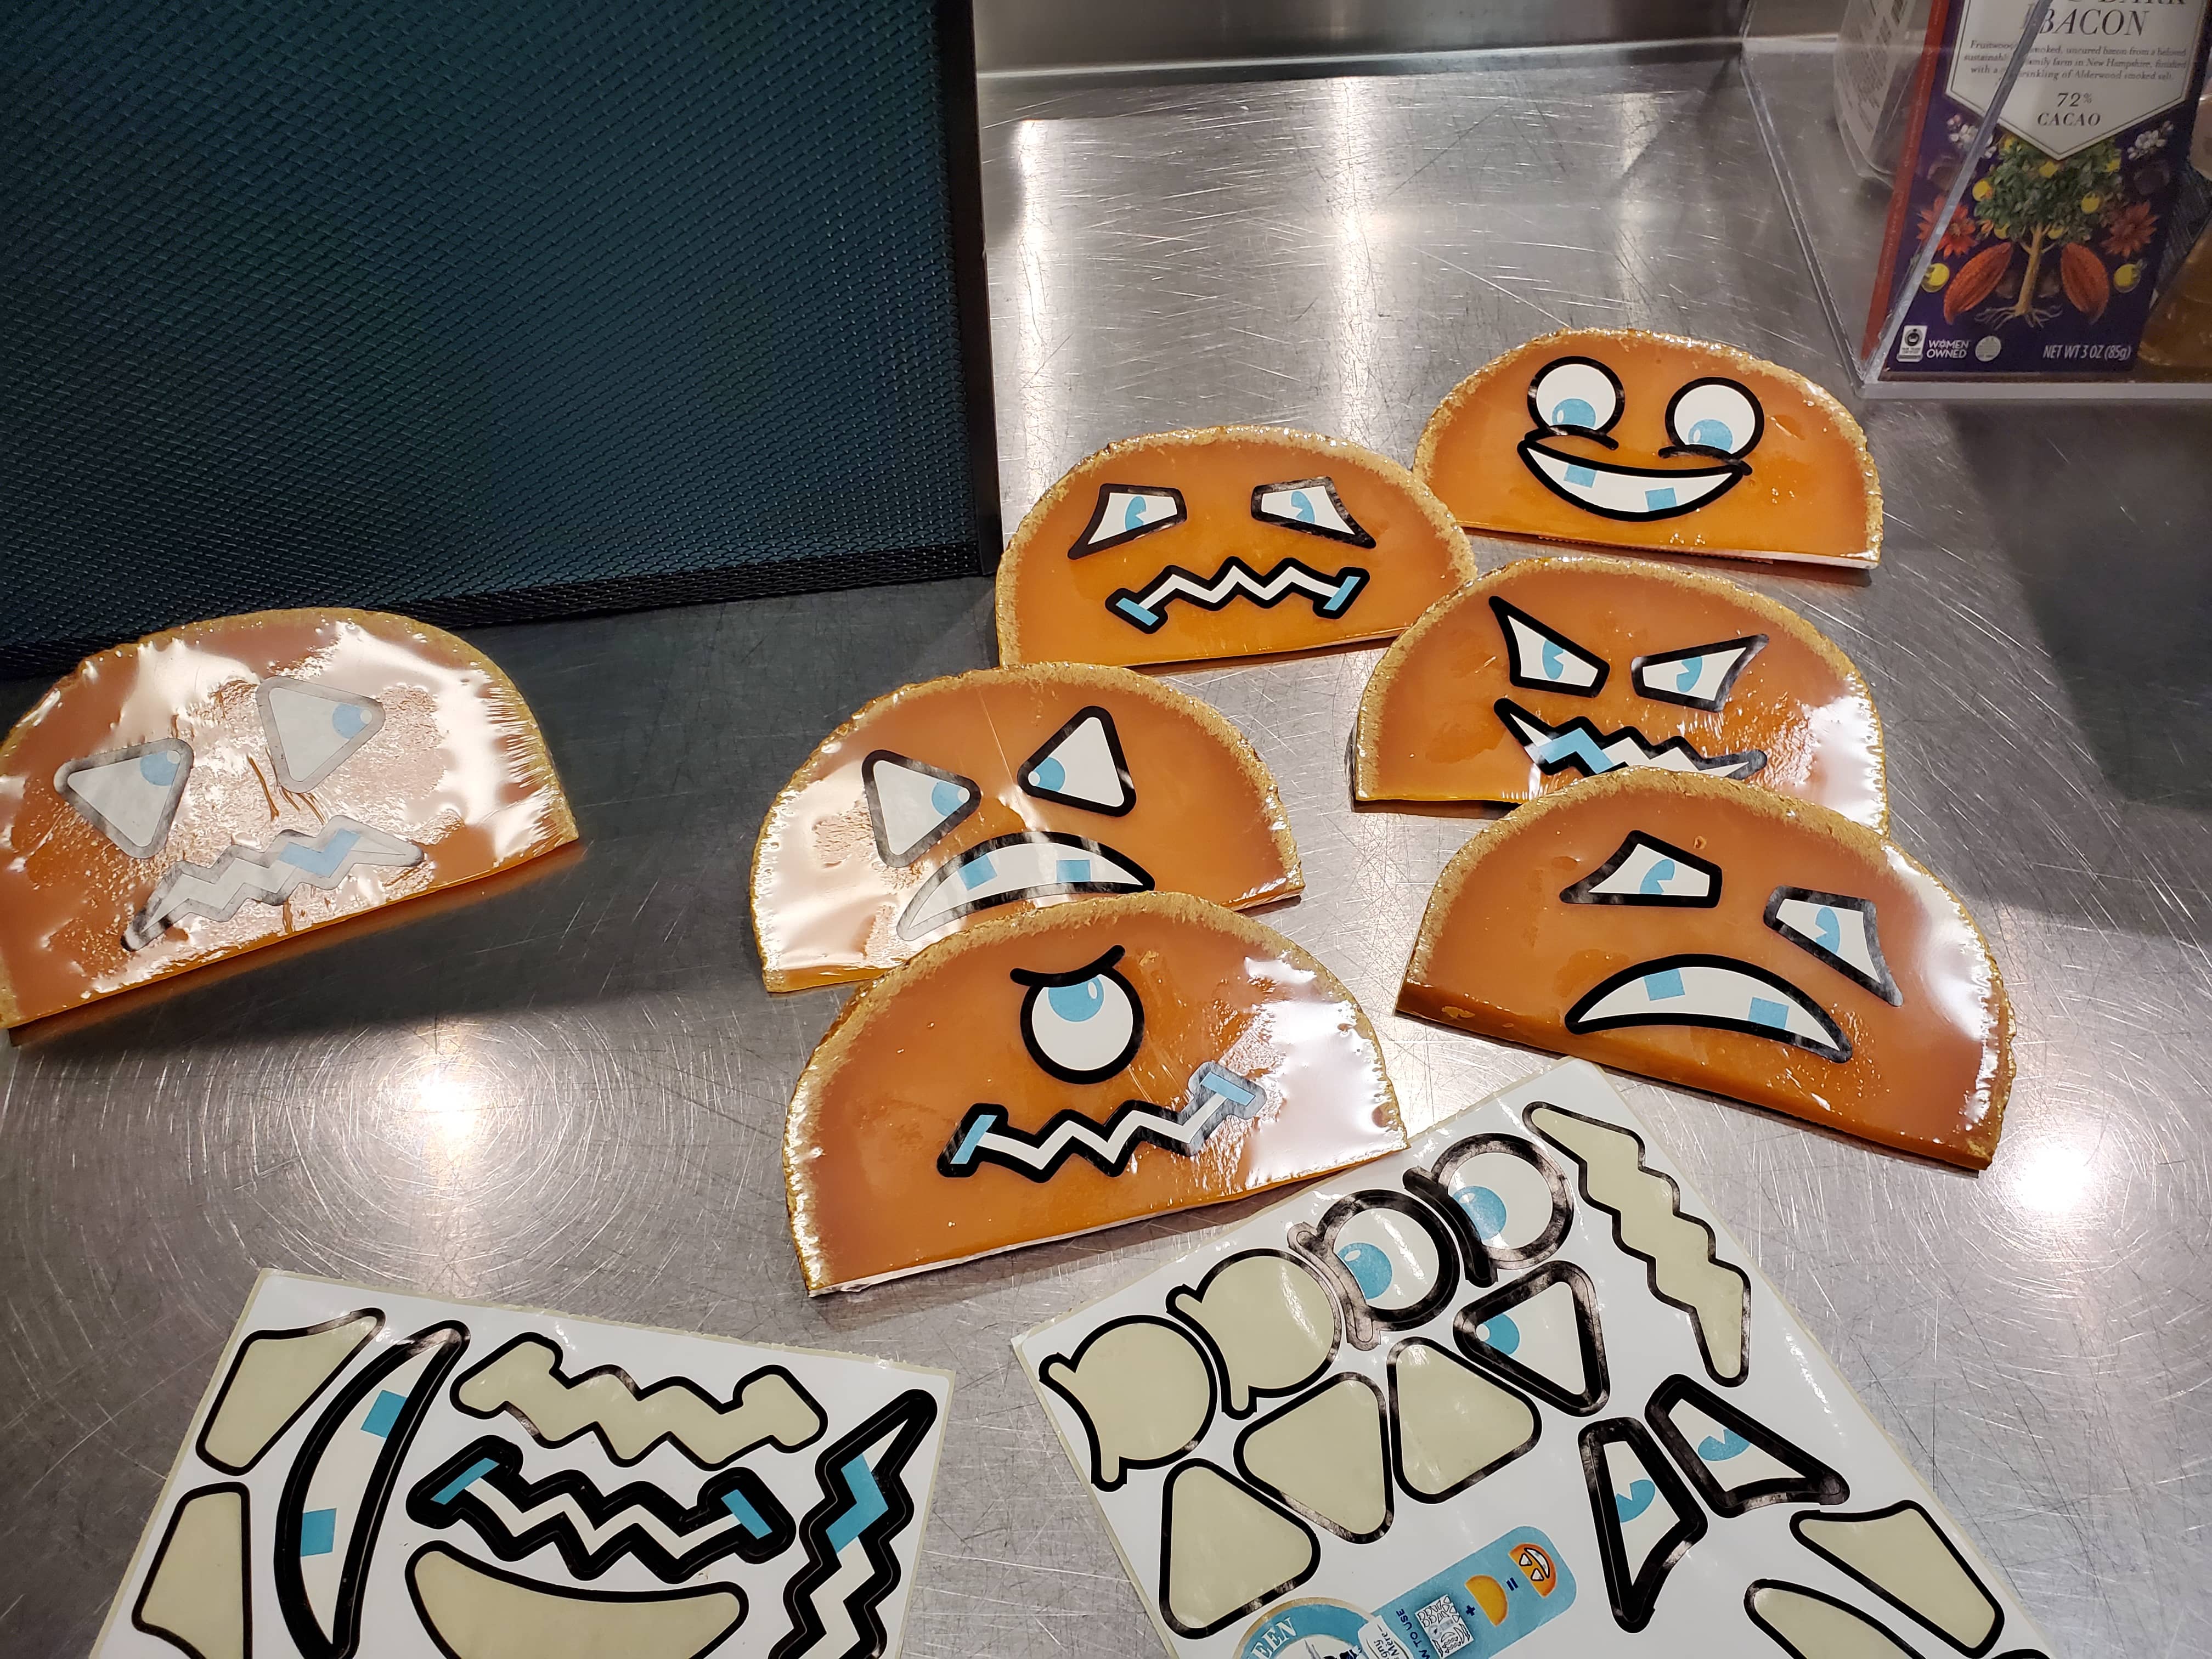 I put some funny faces on cheese at work!